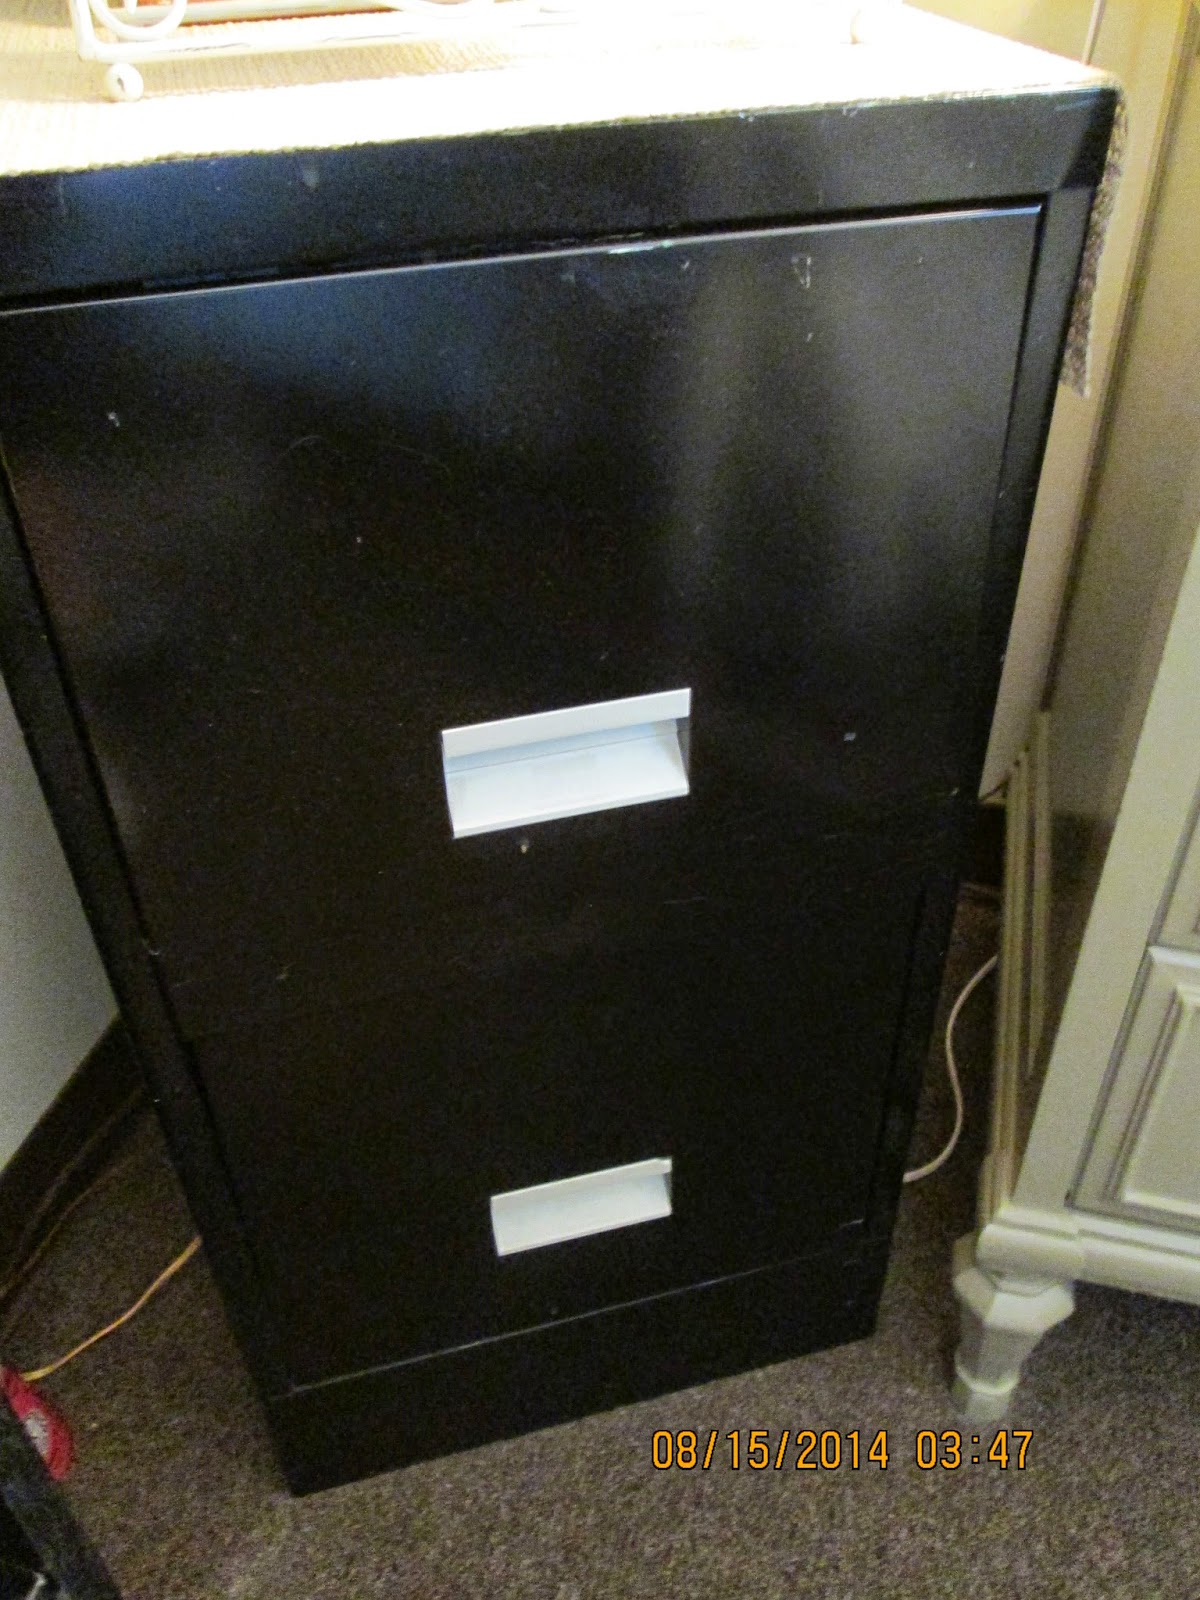 Frugalicious Chick Redecorating An Old File Cabinet With Contact